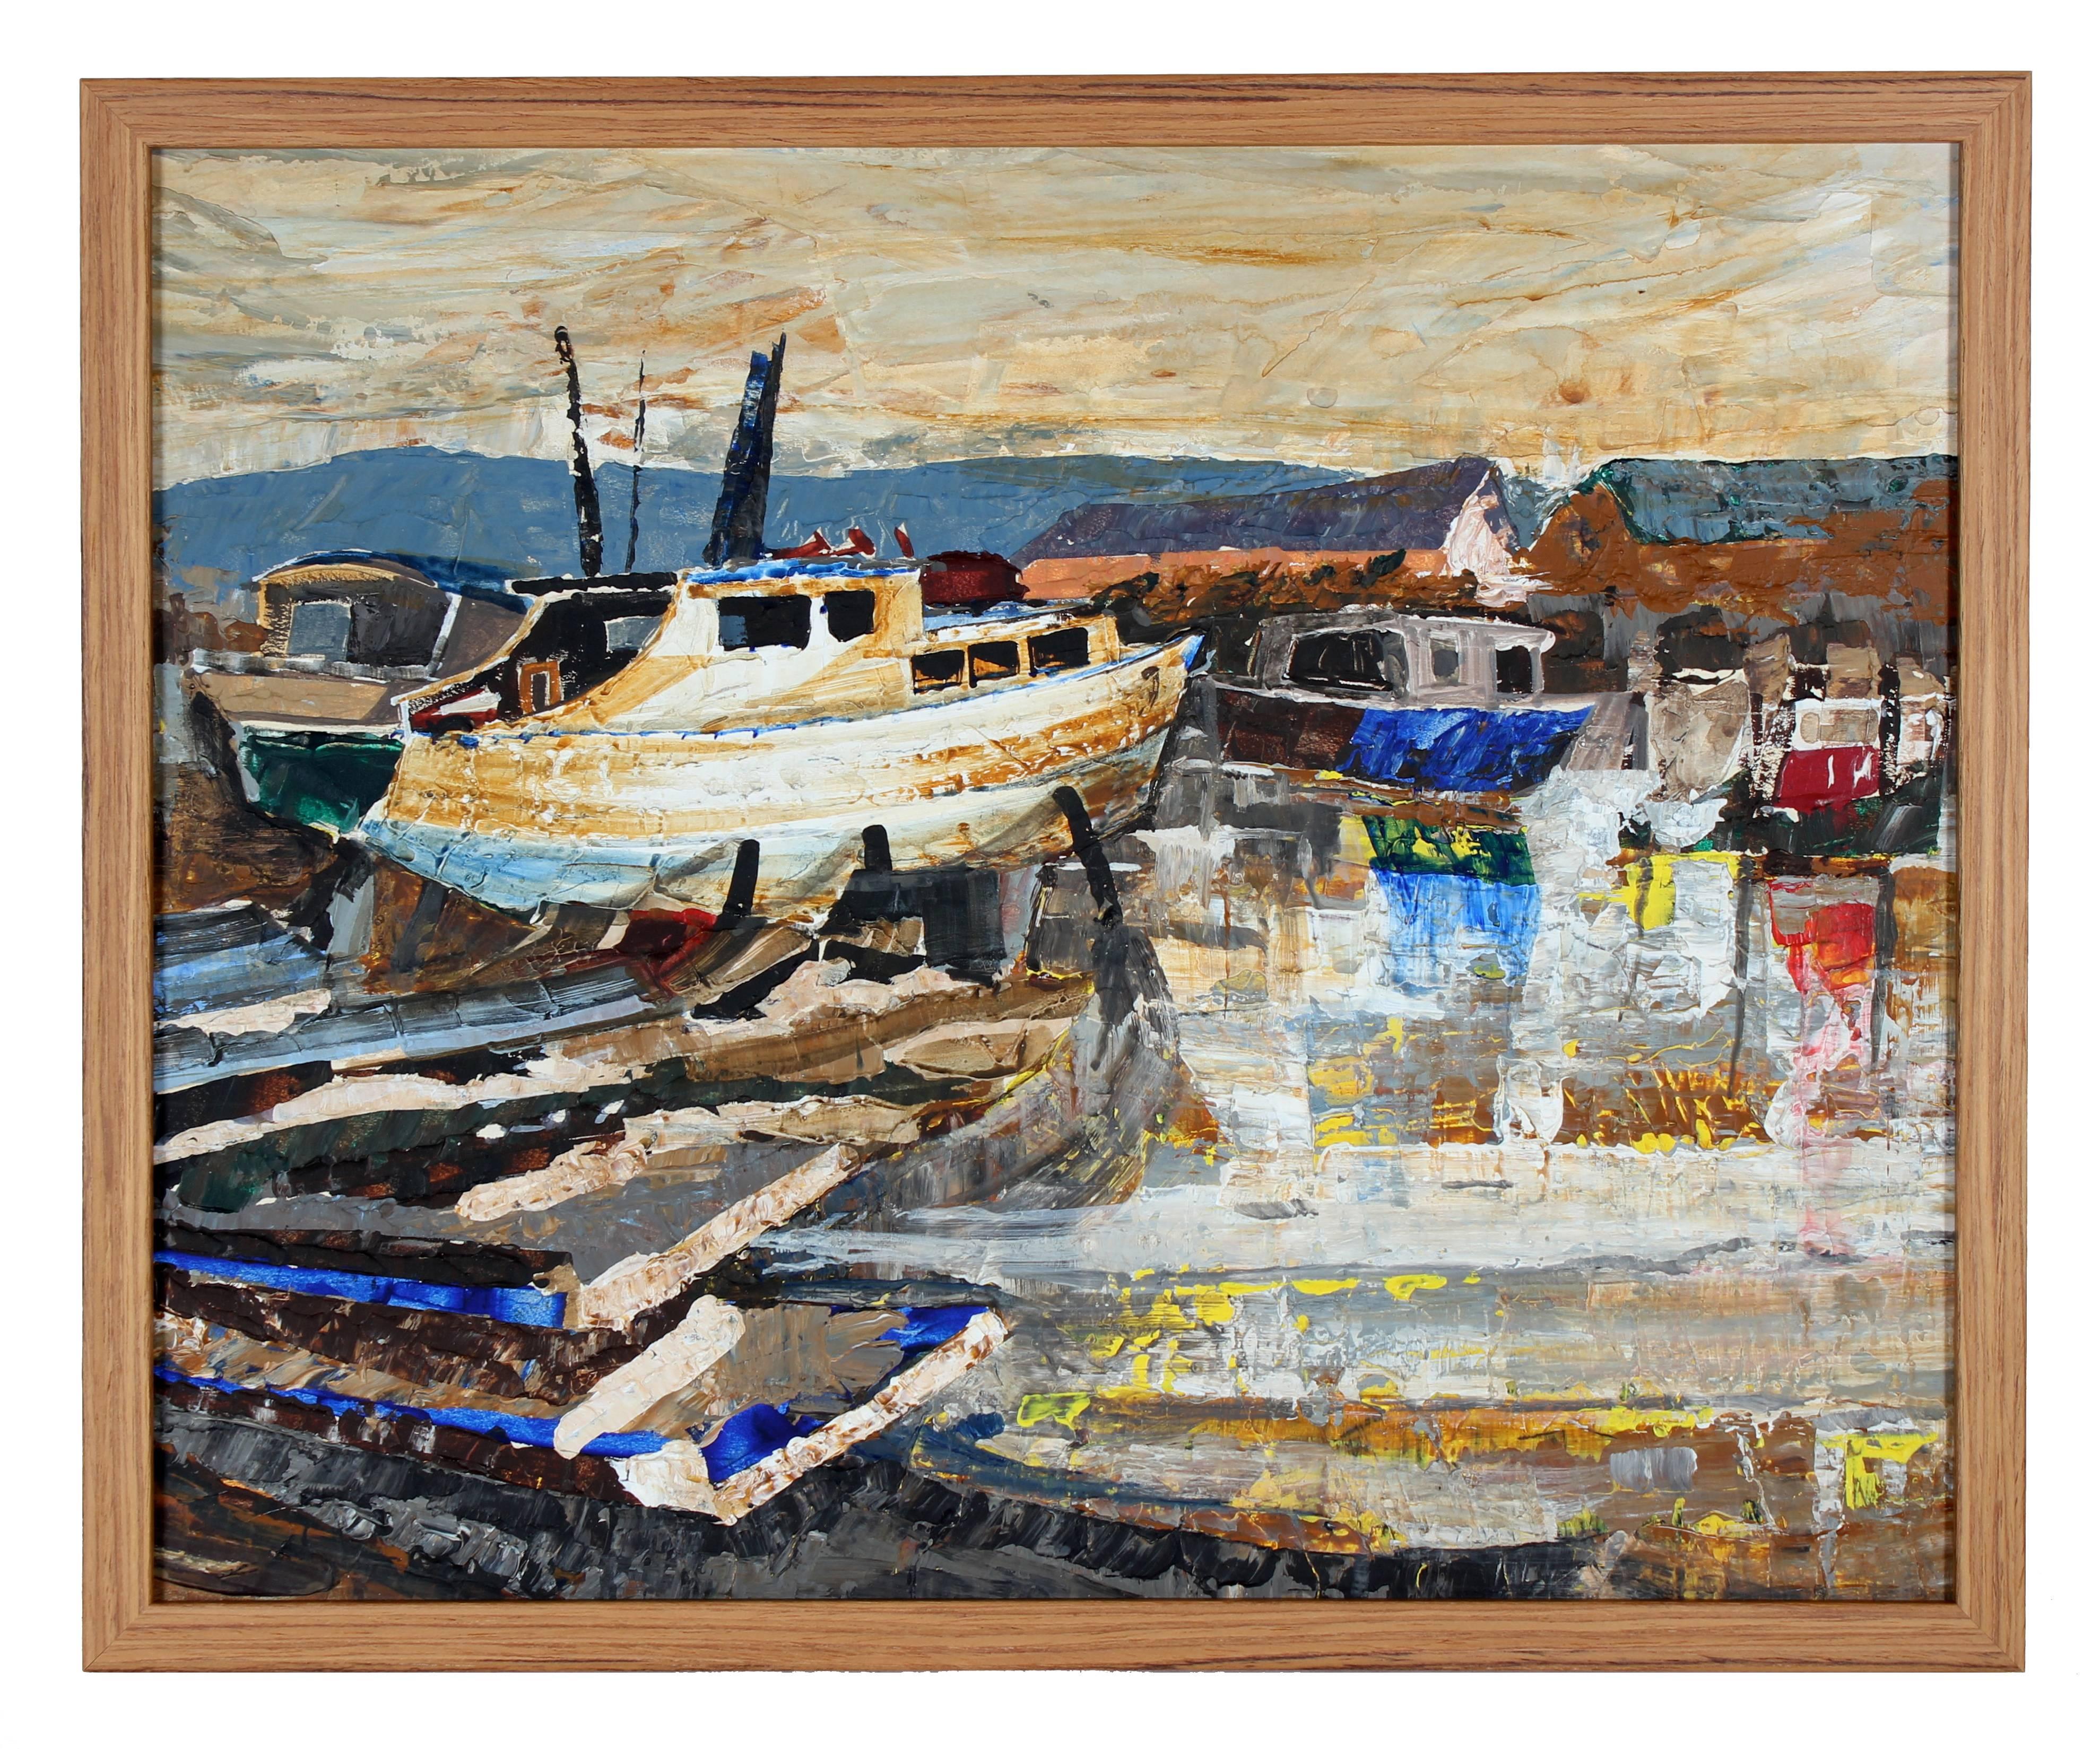 Unknown Landscape Painting - Harbor Scene with Boats, Oil on Board, 20th Century